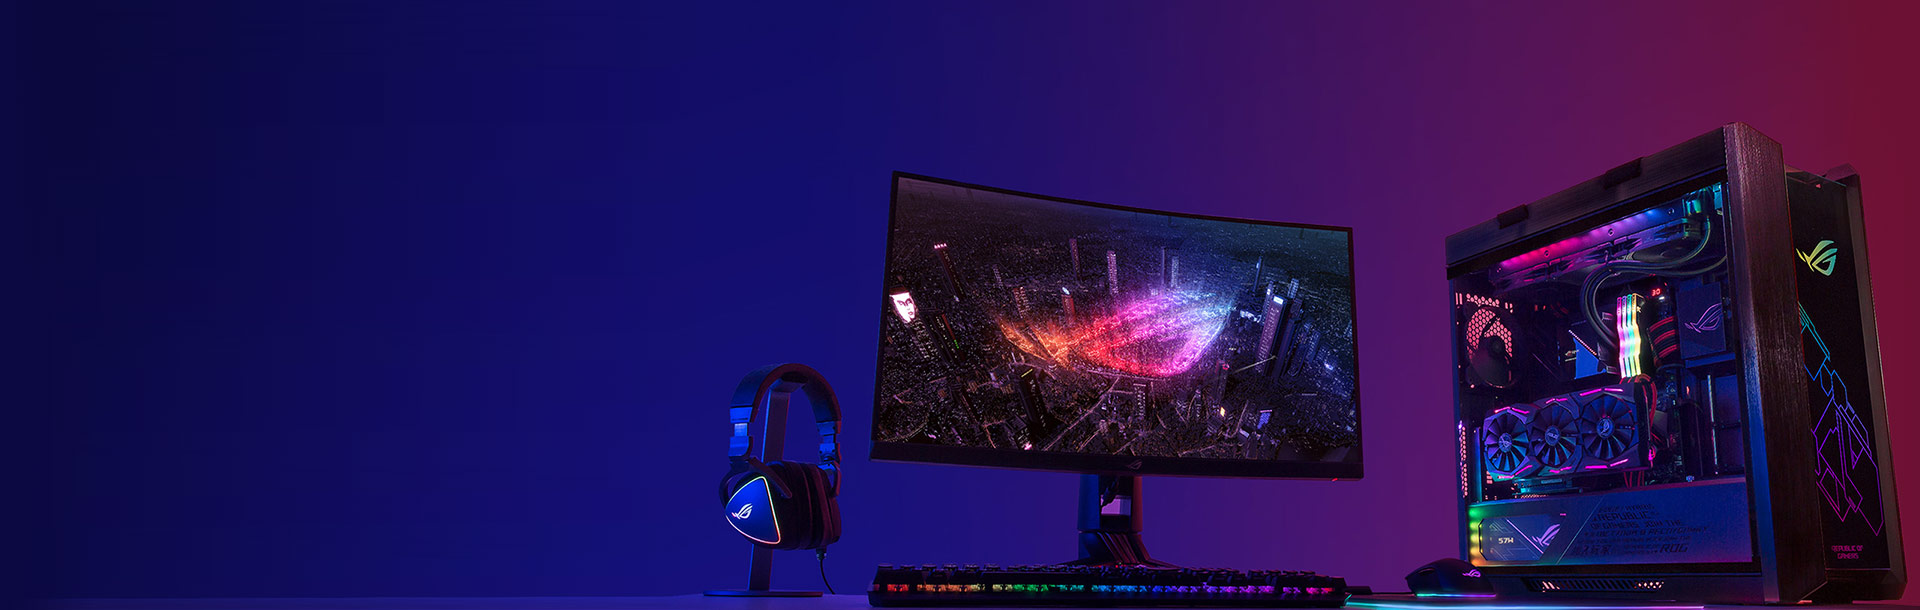 ROG Strix Z690-E Gaming WiFi features diverse ROG ecosystem